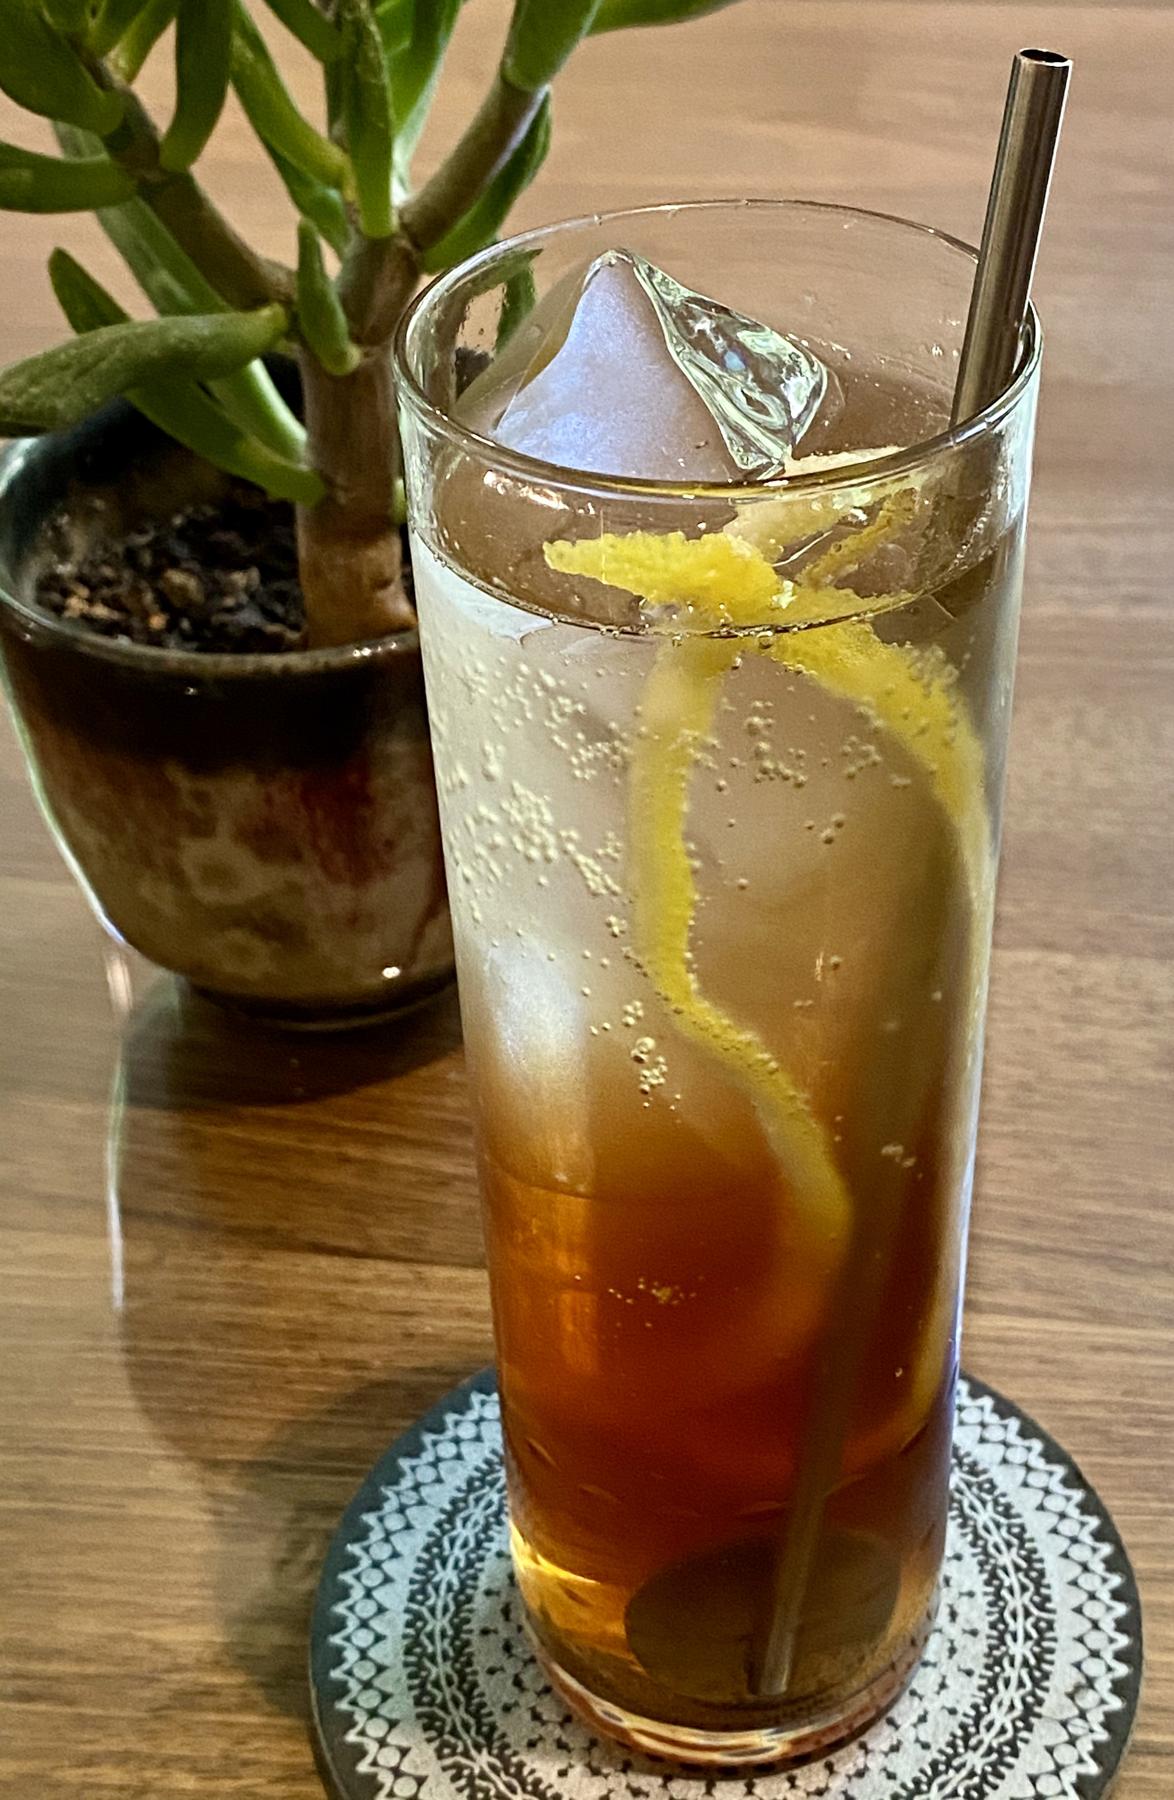 An example of the Berry to Ferry, the mixed drink (drink) featuring seltzer, Pasubio Vino Amaro, Mattei Cap Corse Blanc Quinquina, and lemon twist; photo by Martin Doudoroff